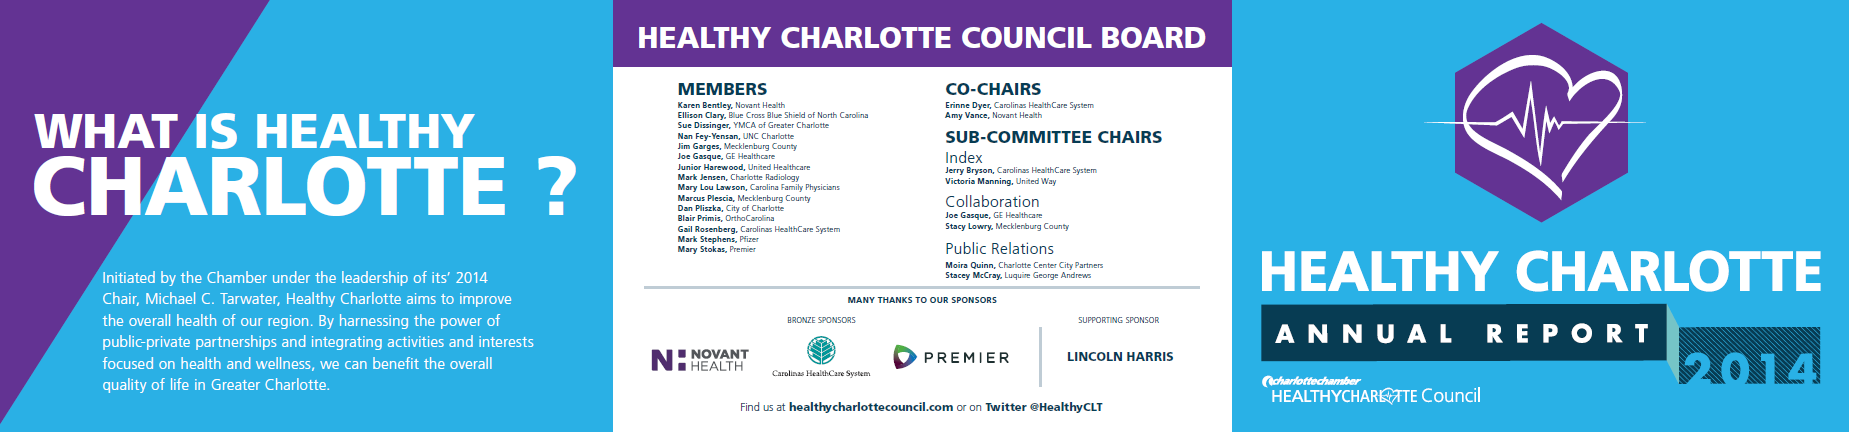 Healthy Charlotte 2014 Report_2